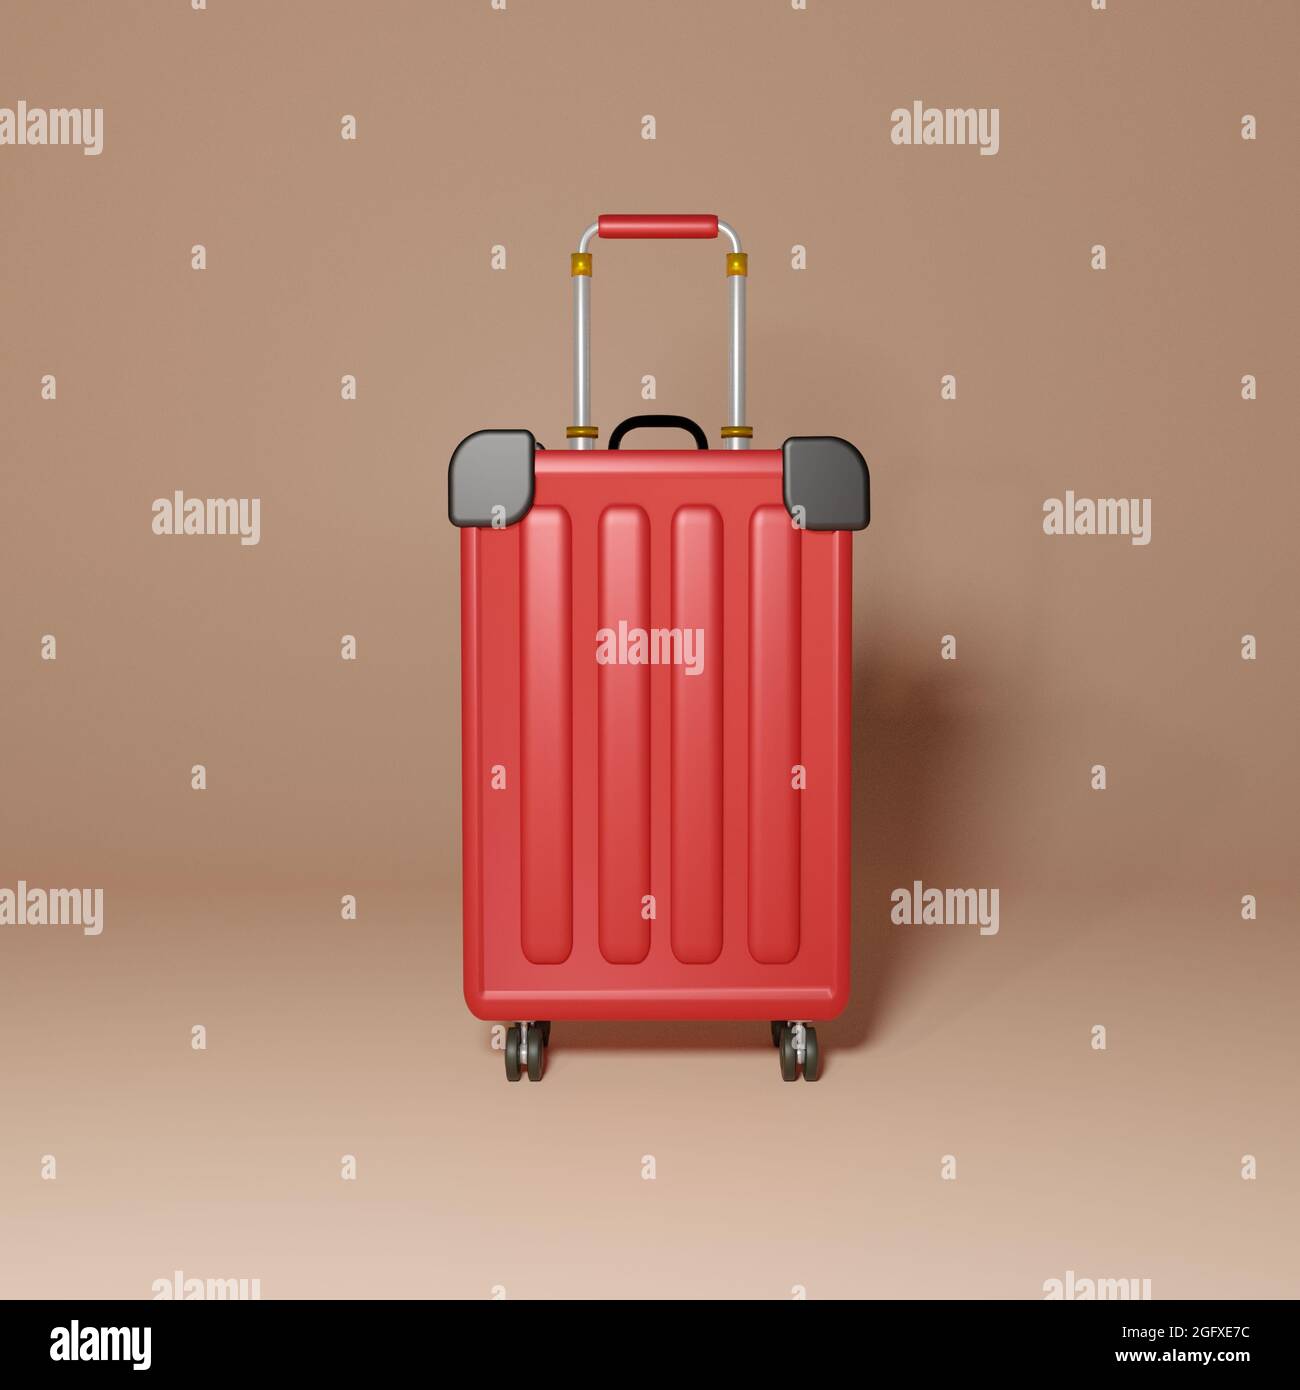 suitcase 3d design illustration with cycle render Stock Photo